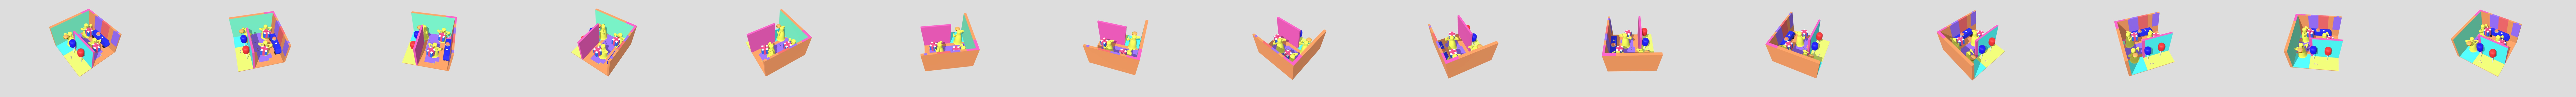 Backrooms Level 100 - Download Free 3D model by timmy (@timislav845455)  [19a8790]